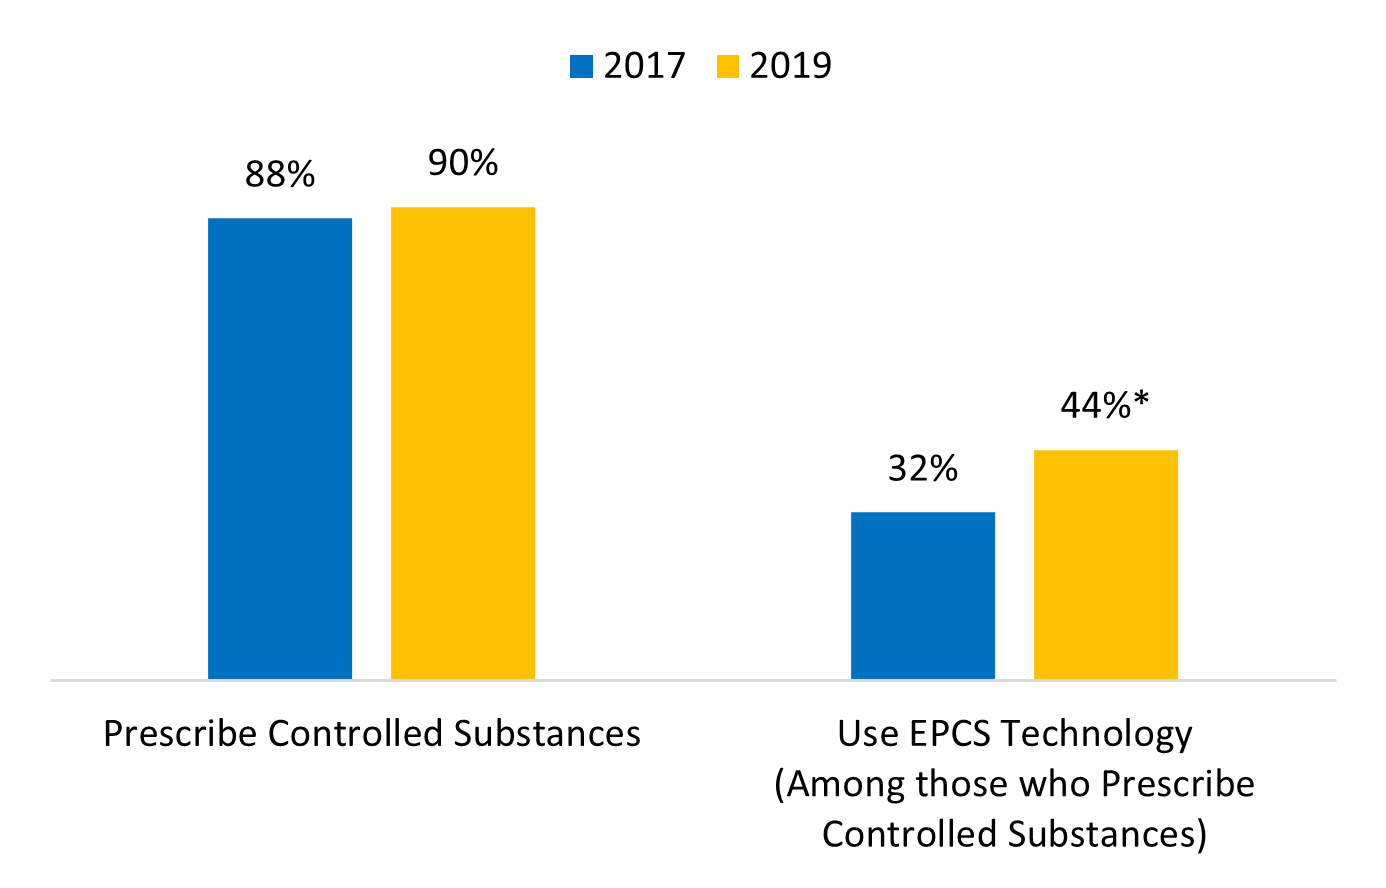 Percent of office-based physicians that prescribe controlled substances and use EPCS technology, 2017-2019.